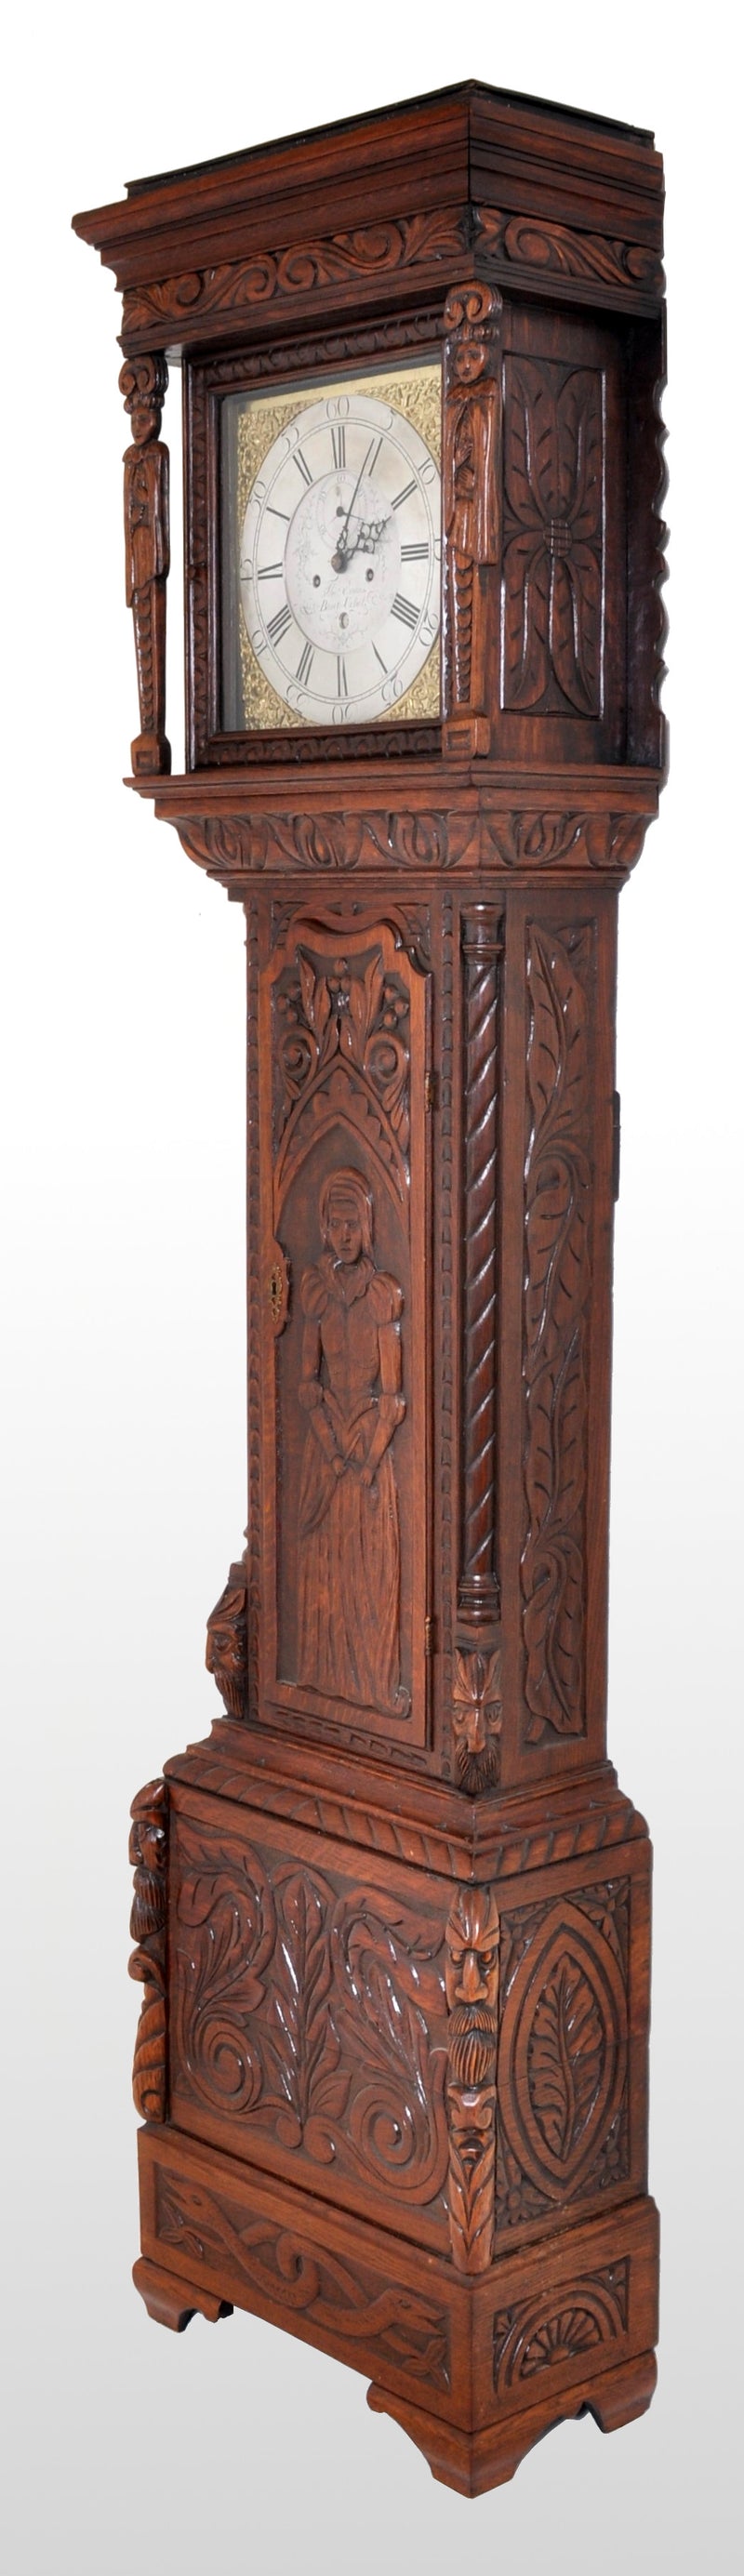 Antique Welsh Carved Oak 8-Day Longcase/Grandfather Clock by Thomas Evans, circa 1770